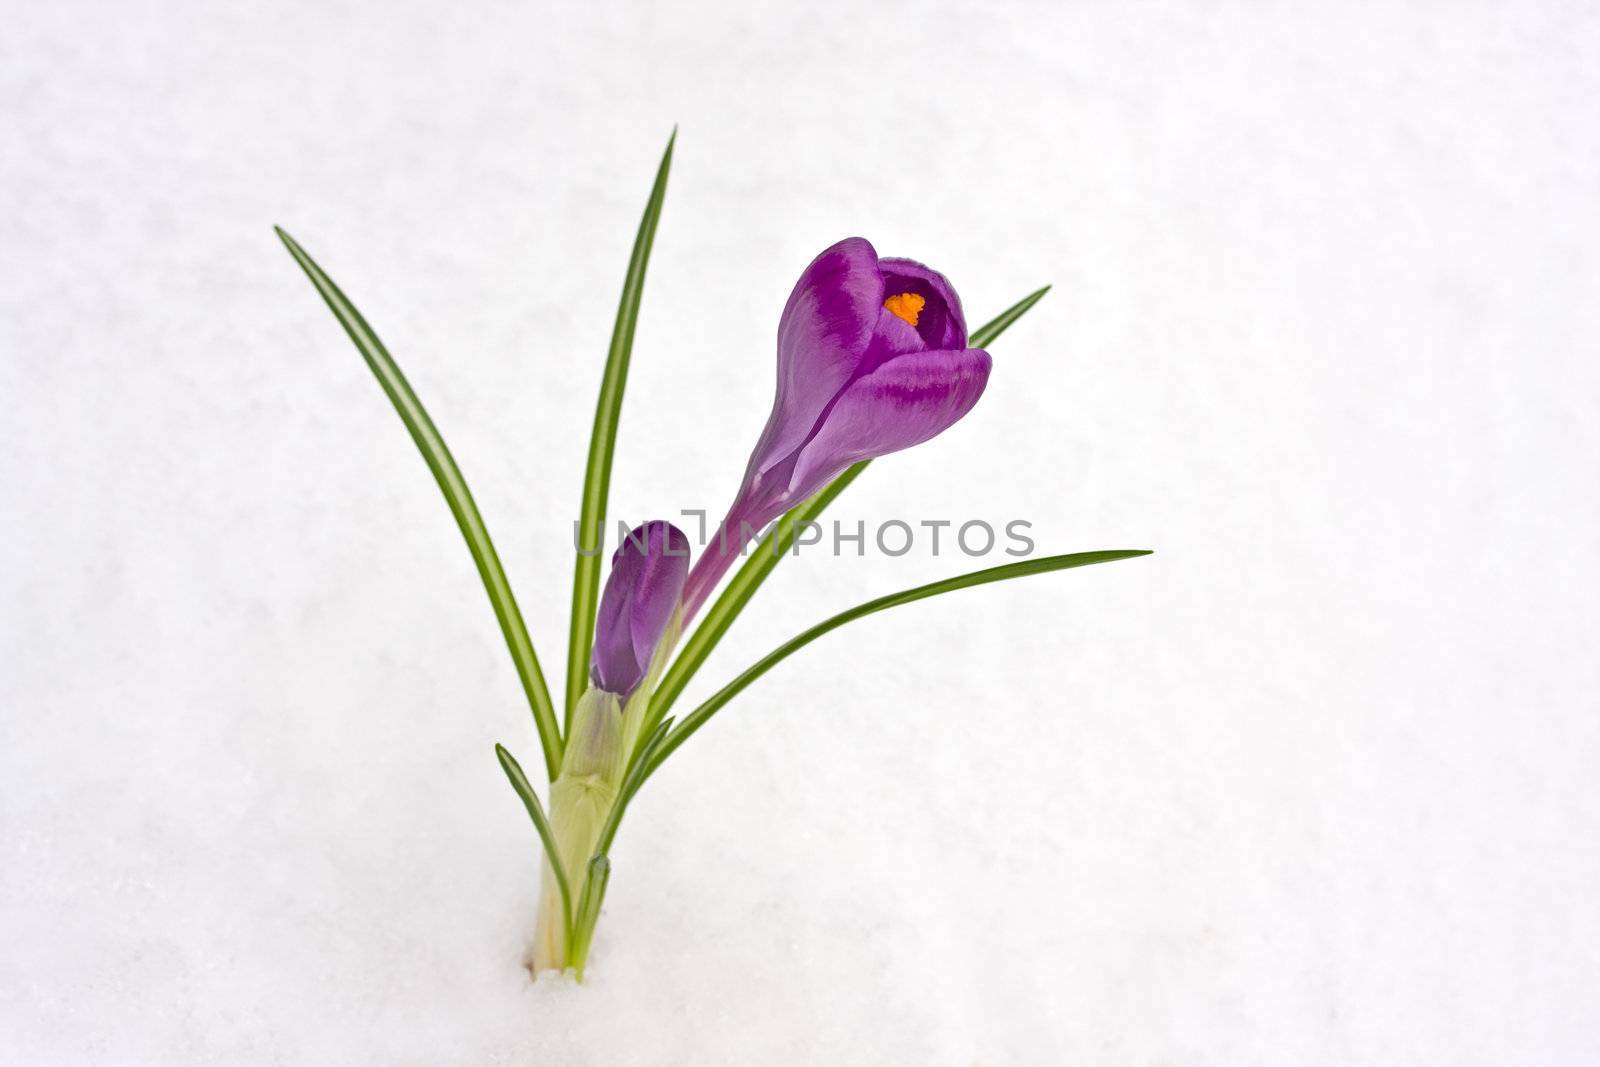 detail of a purple crocus flower in the snow